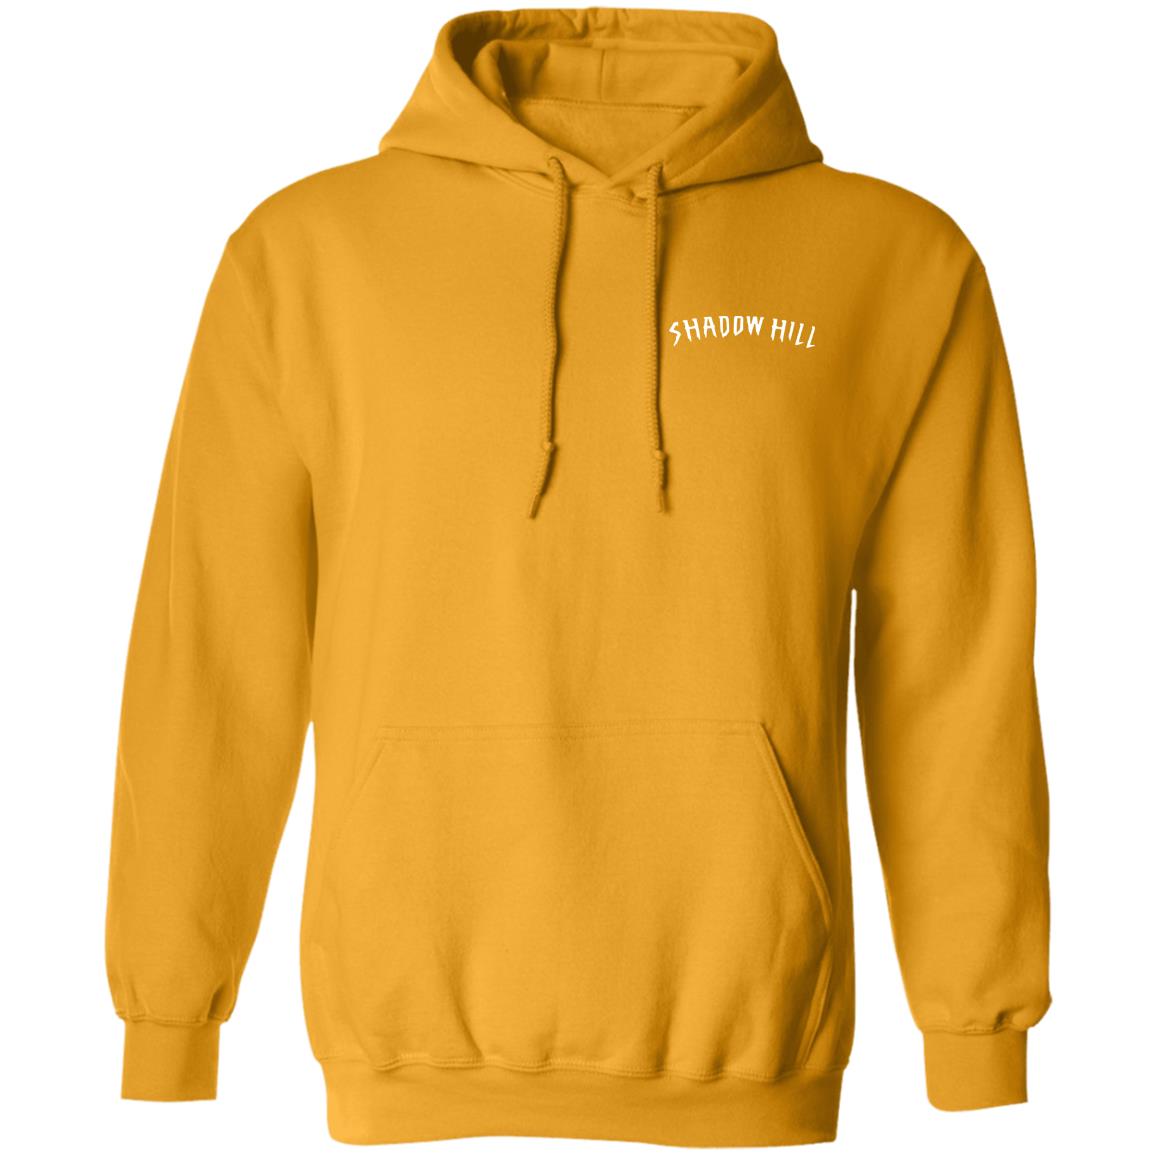 Shadow hill hoodie front - Tipatee